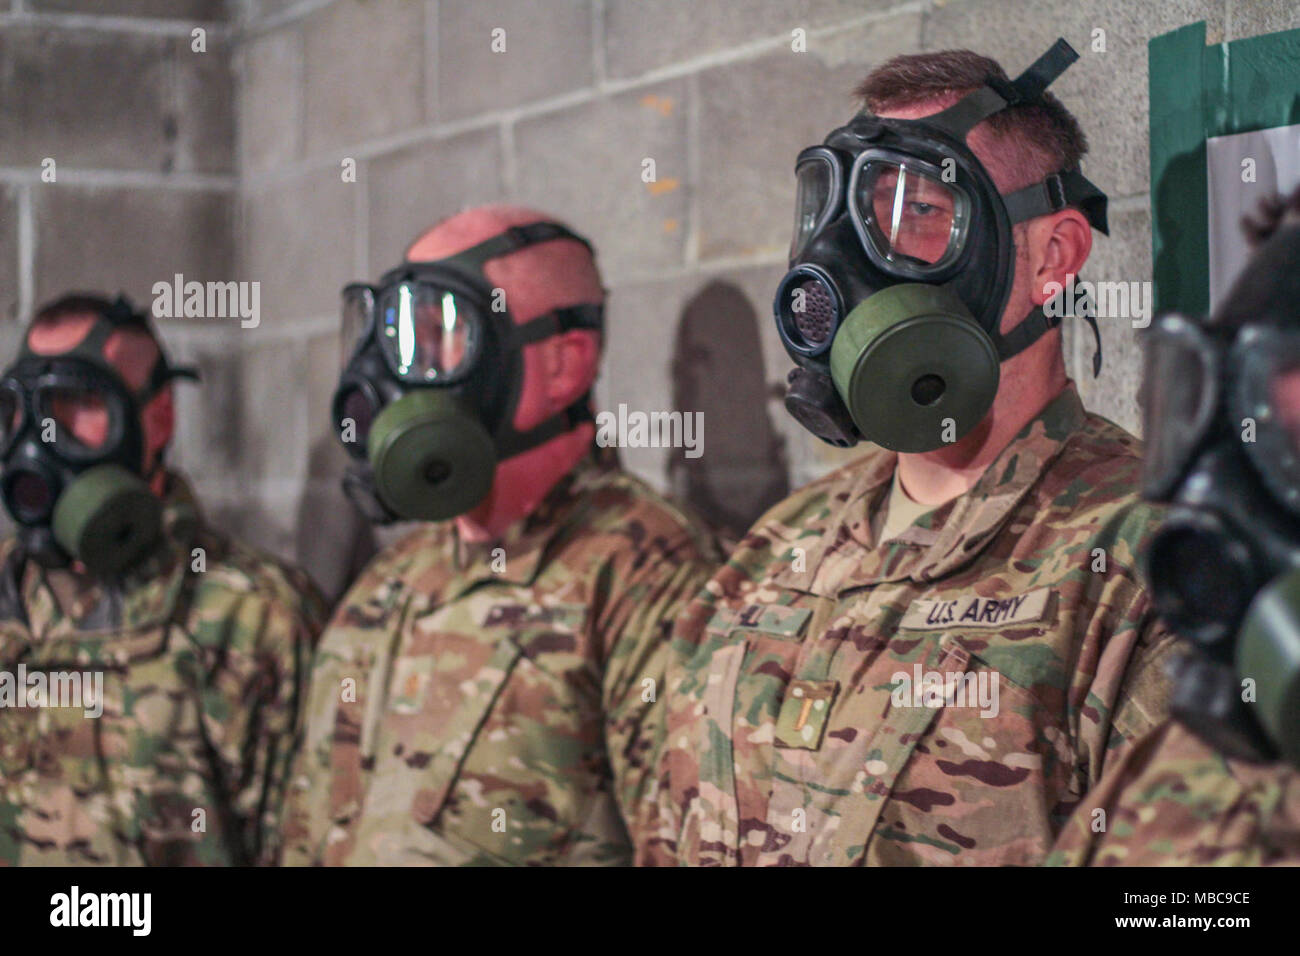 Guardsmen assigned to 155th Armored Brigade Combat Team, participate in a chemical protective mask confidence exercise at Camp Shelby Joint Forces Training Center, Miss., Feb. 15, 2018.  The 155th ABCT is preparing for an upcoming deployment to the Middle East in support of Operation Spartan Shield. (U.S. Army National Guard Stock Photo